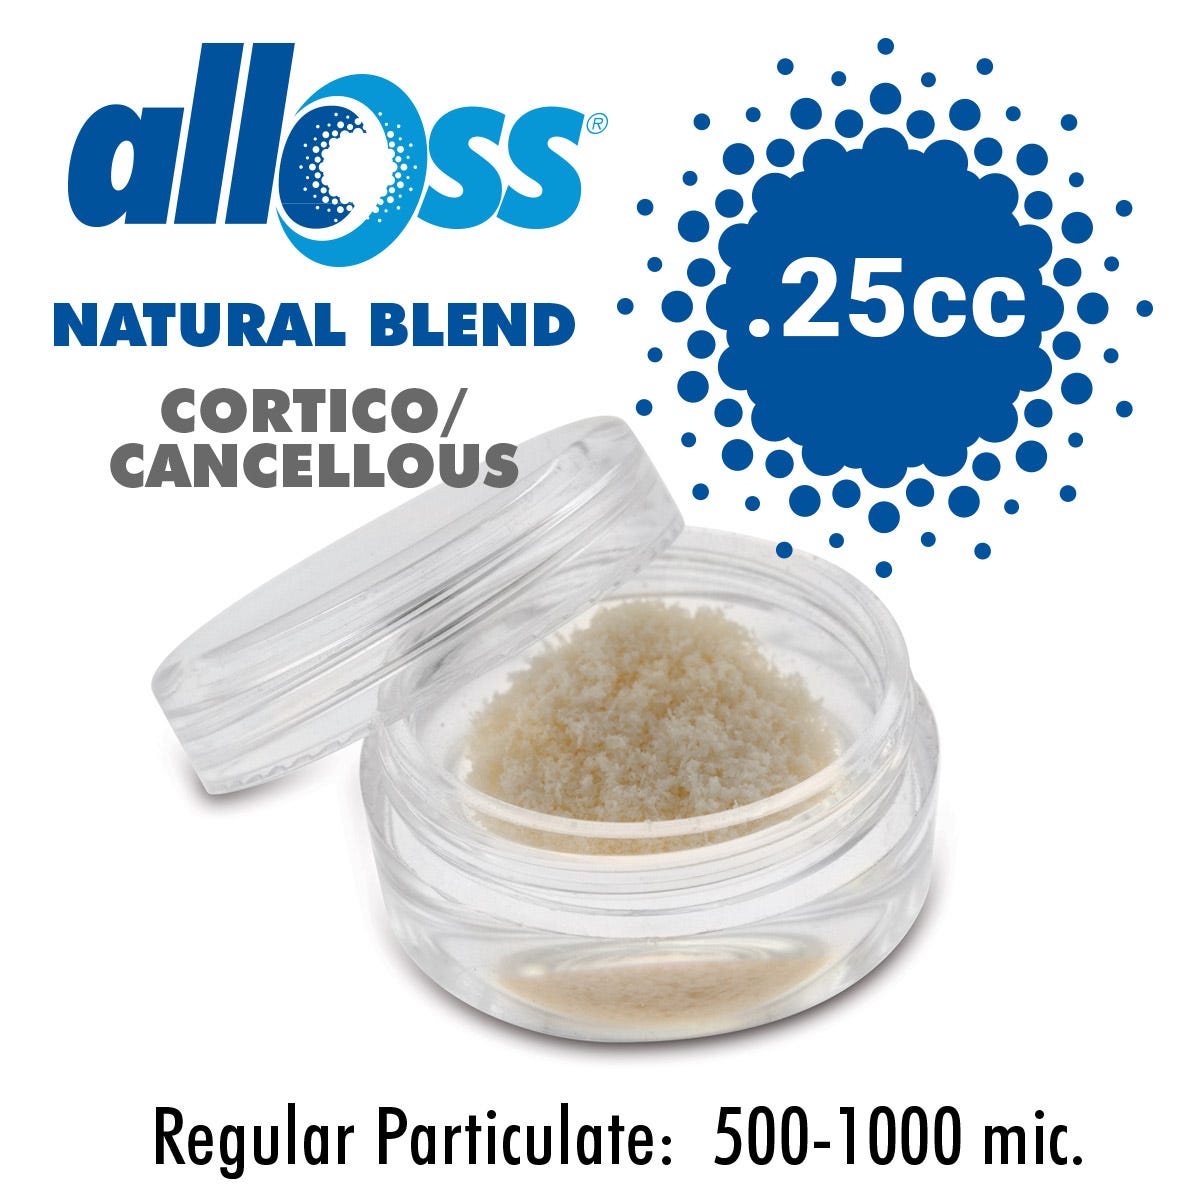 alloOss® Natural Blend Mineralized/Demineralized Particulate 500-1000um (0.25cc)